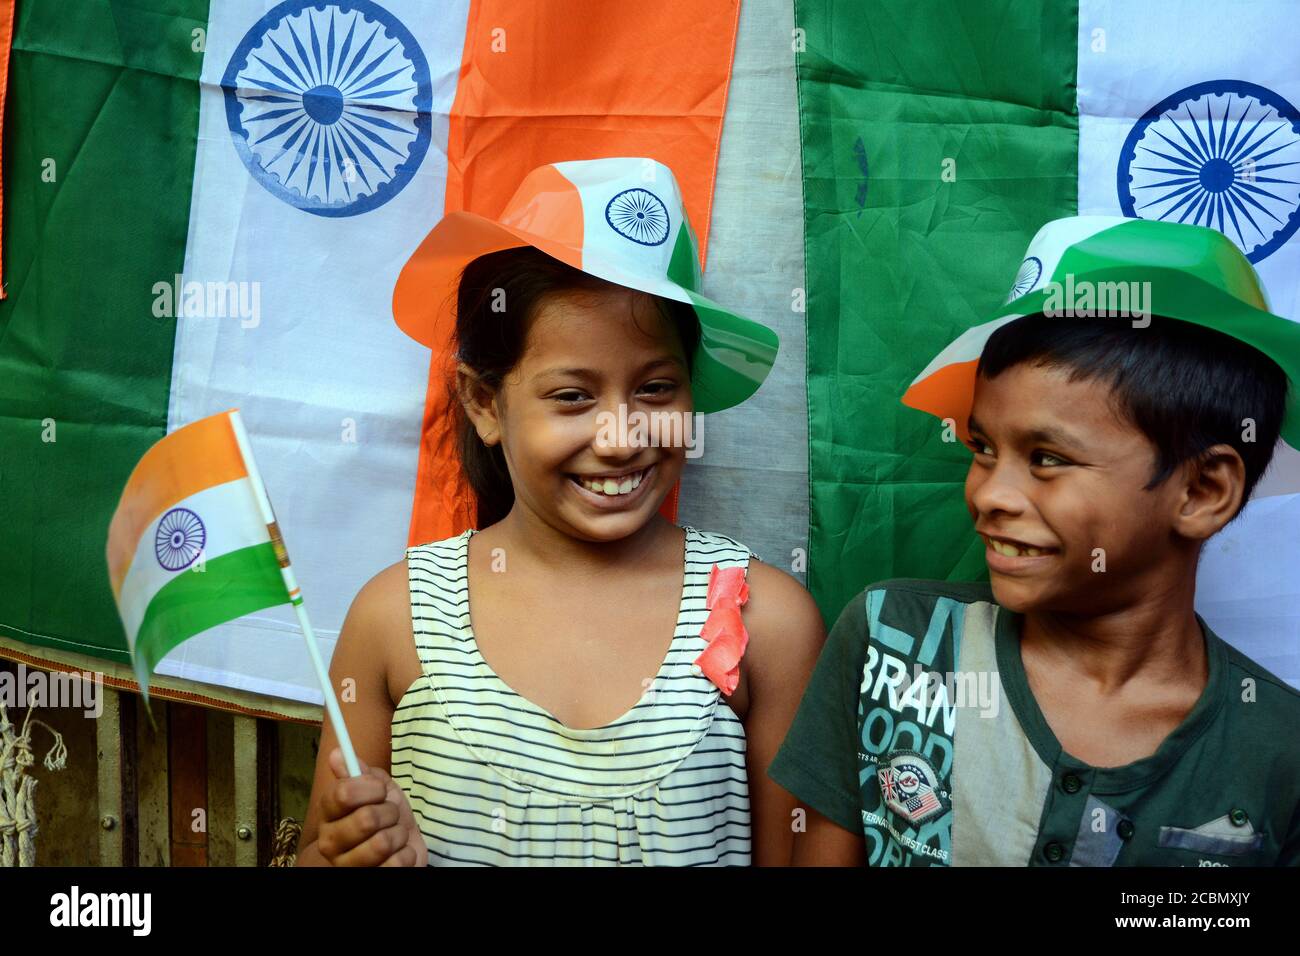 Street children to celebrate Independence Day on 15th August Stock ...